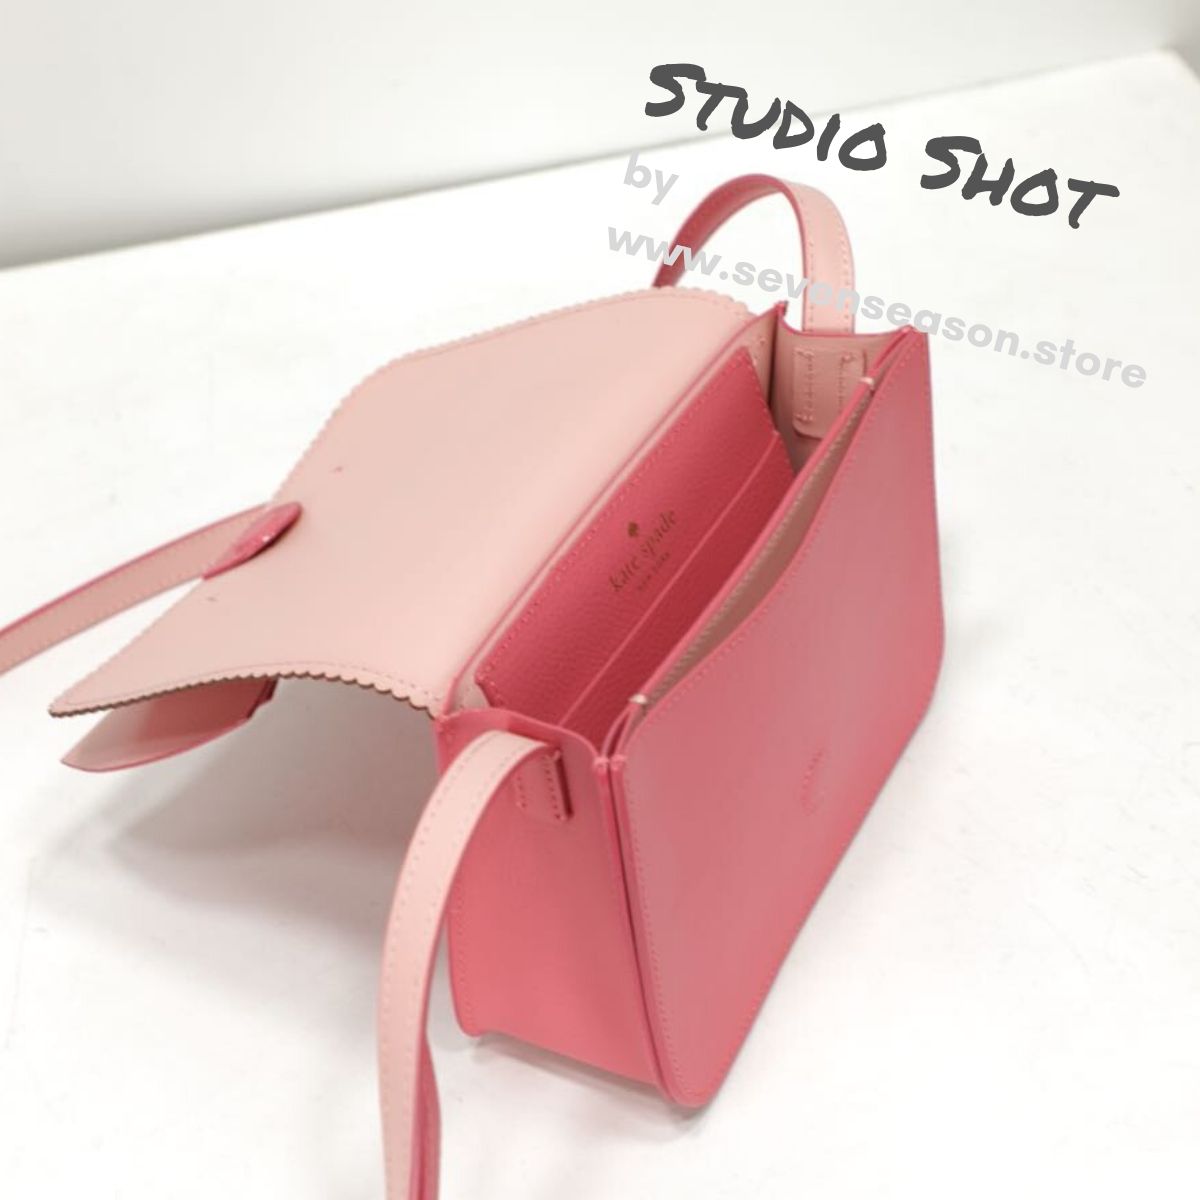 IN SEARCH OF BUBBLEGUM PINK KATE SPADE BAG